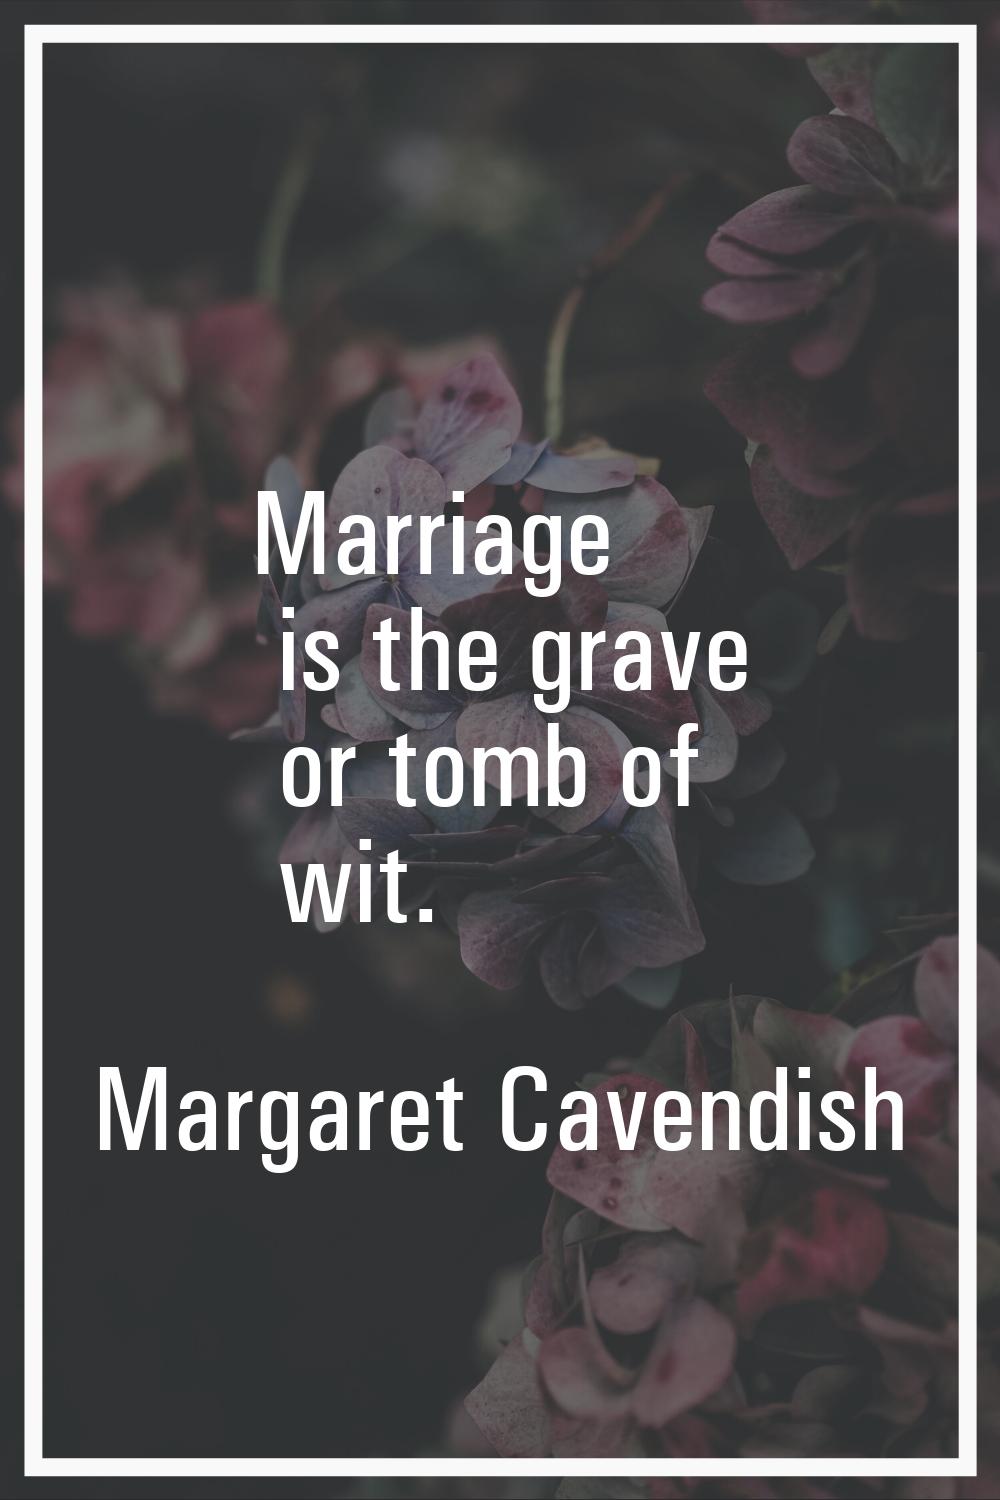 Marriage is the grave or tomb of wit.